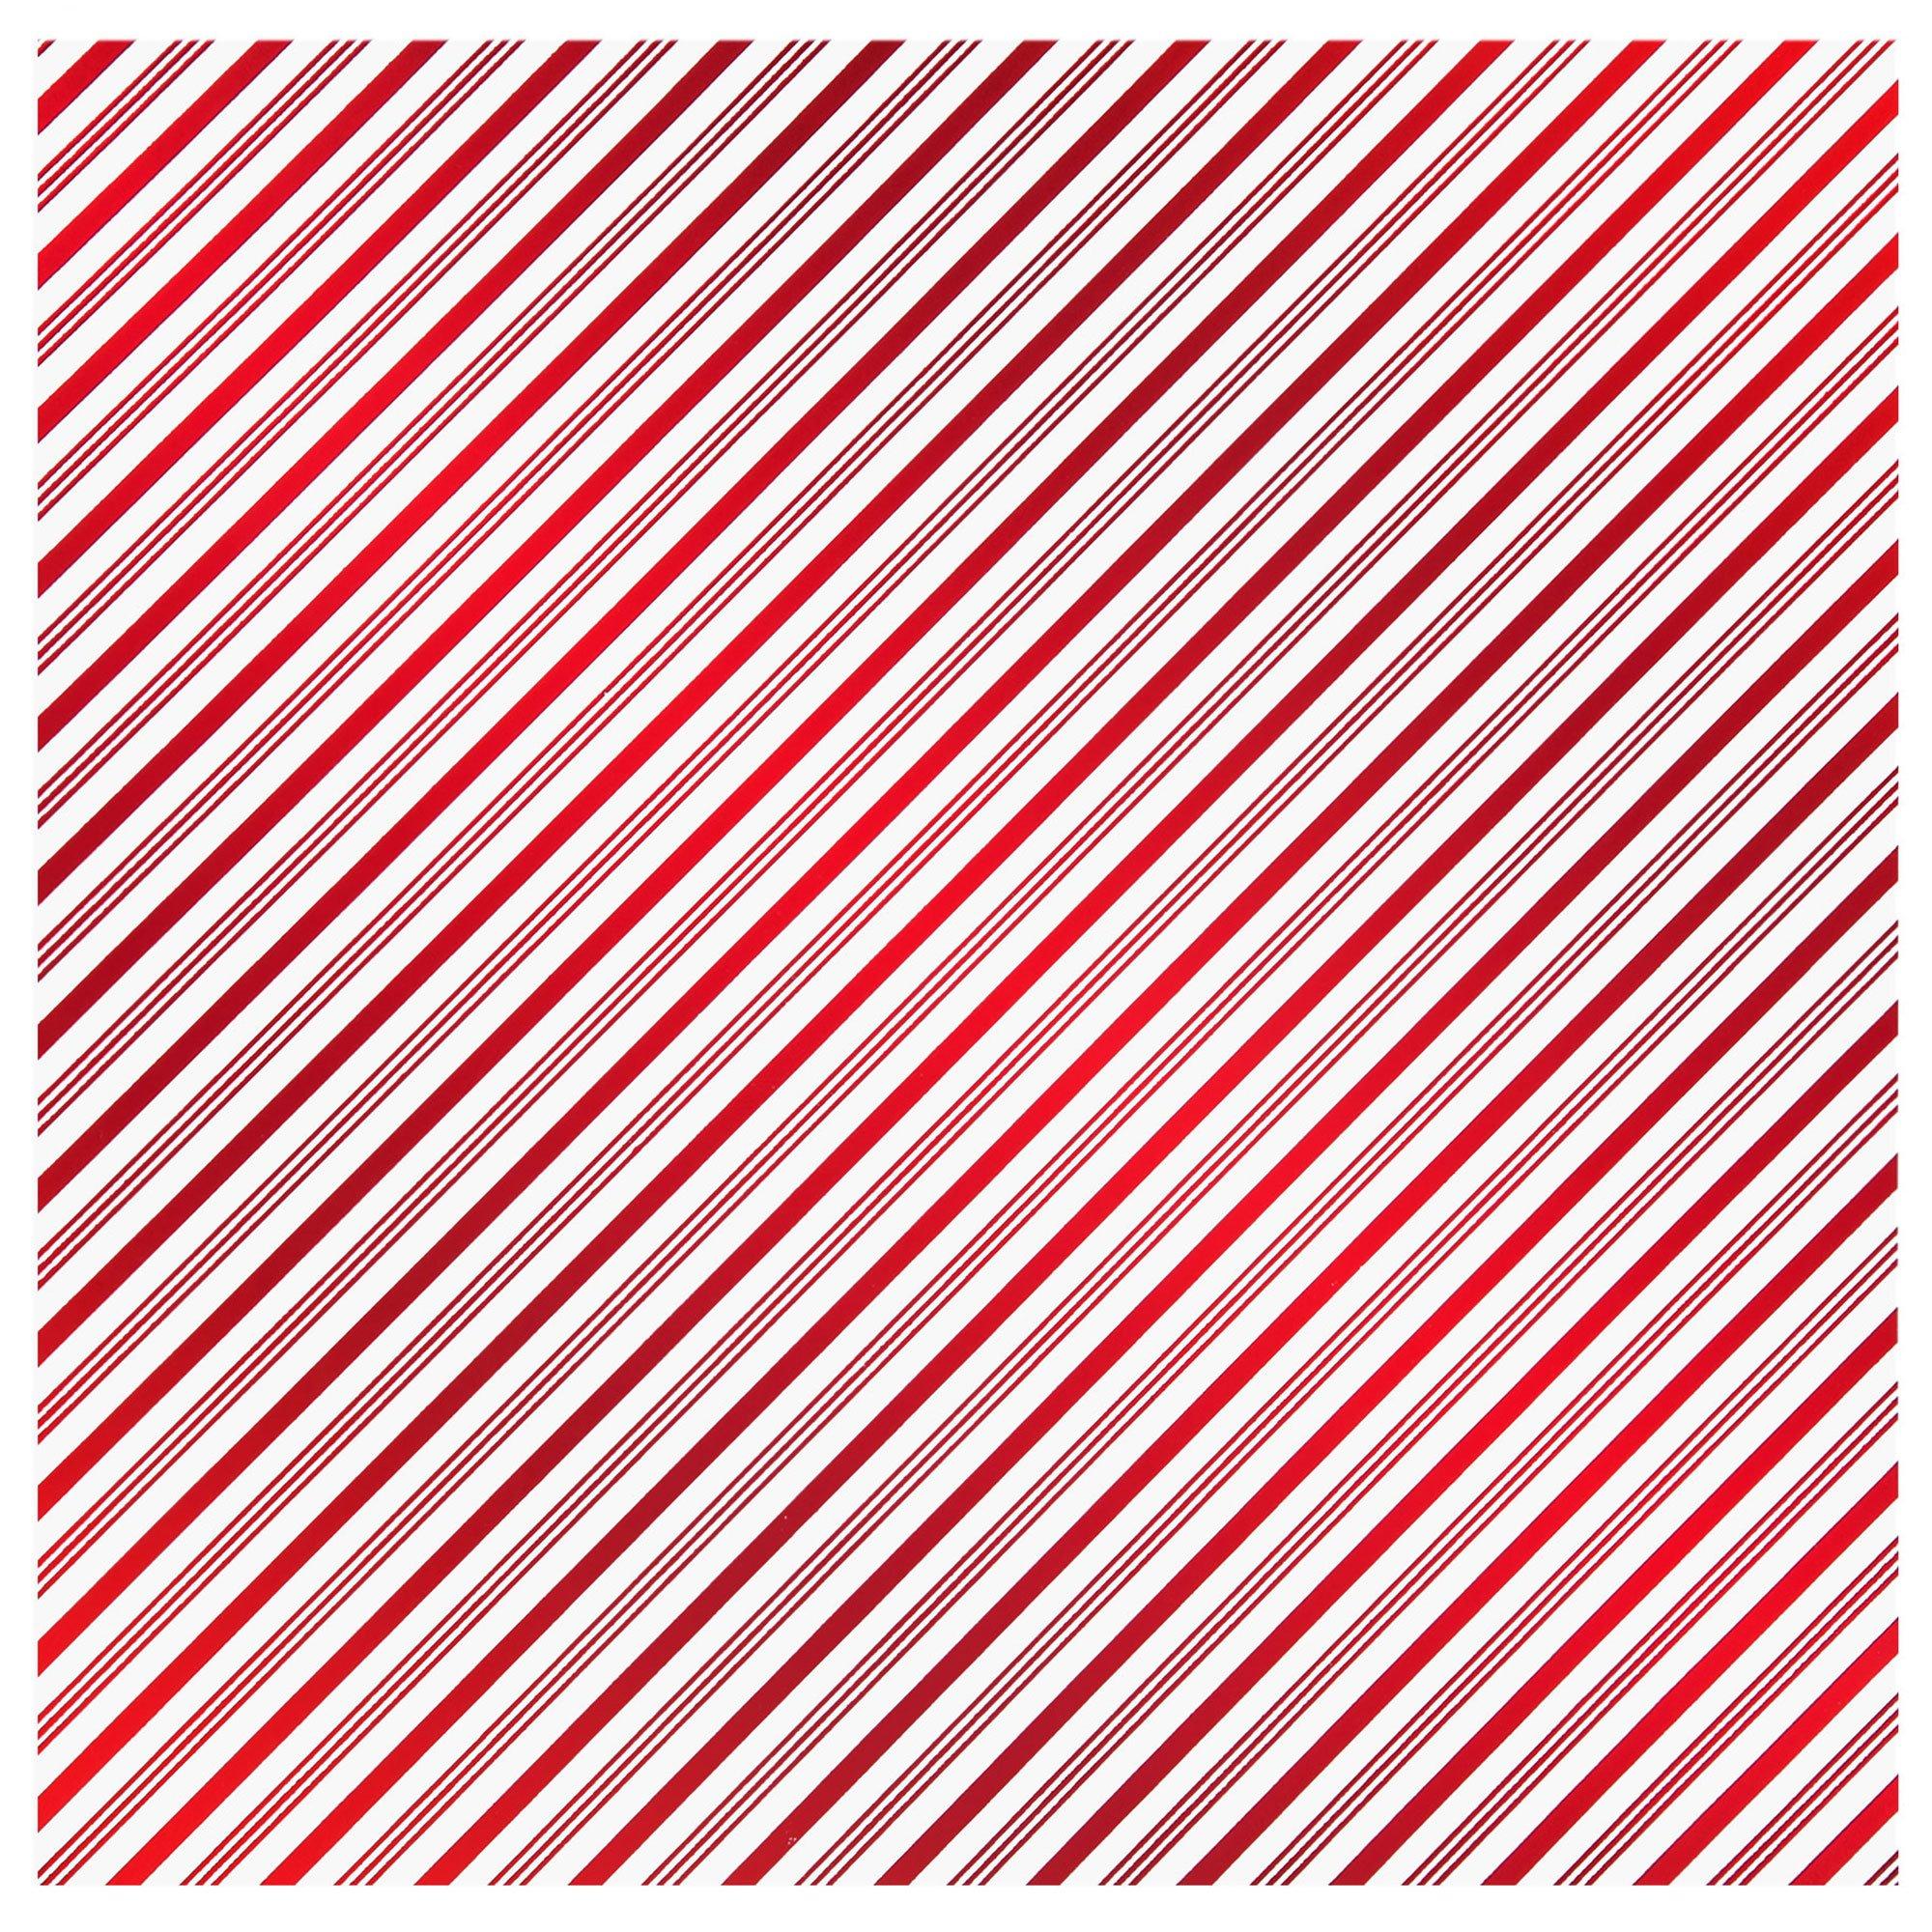 Candy Cane Striped Scrapbook Paper - 8 1/2 x 11, Hobby Lobby